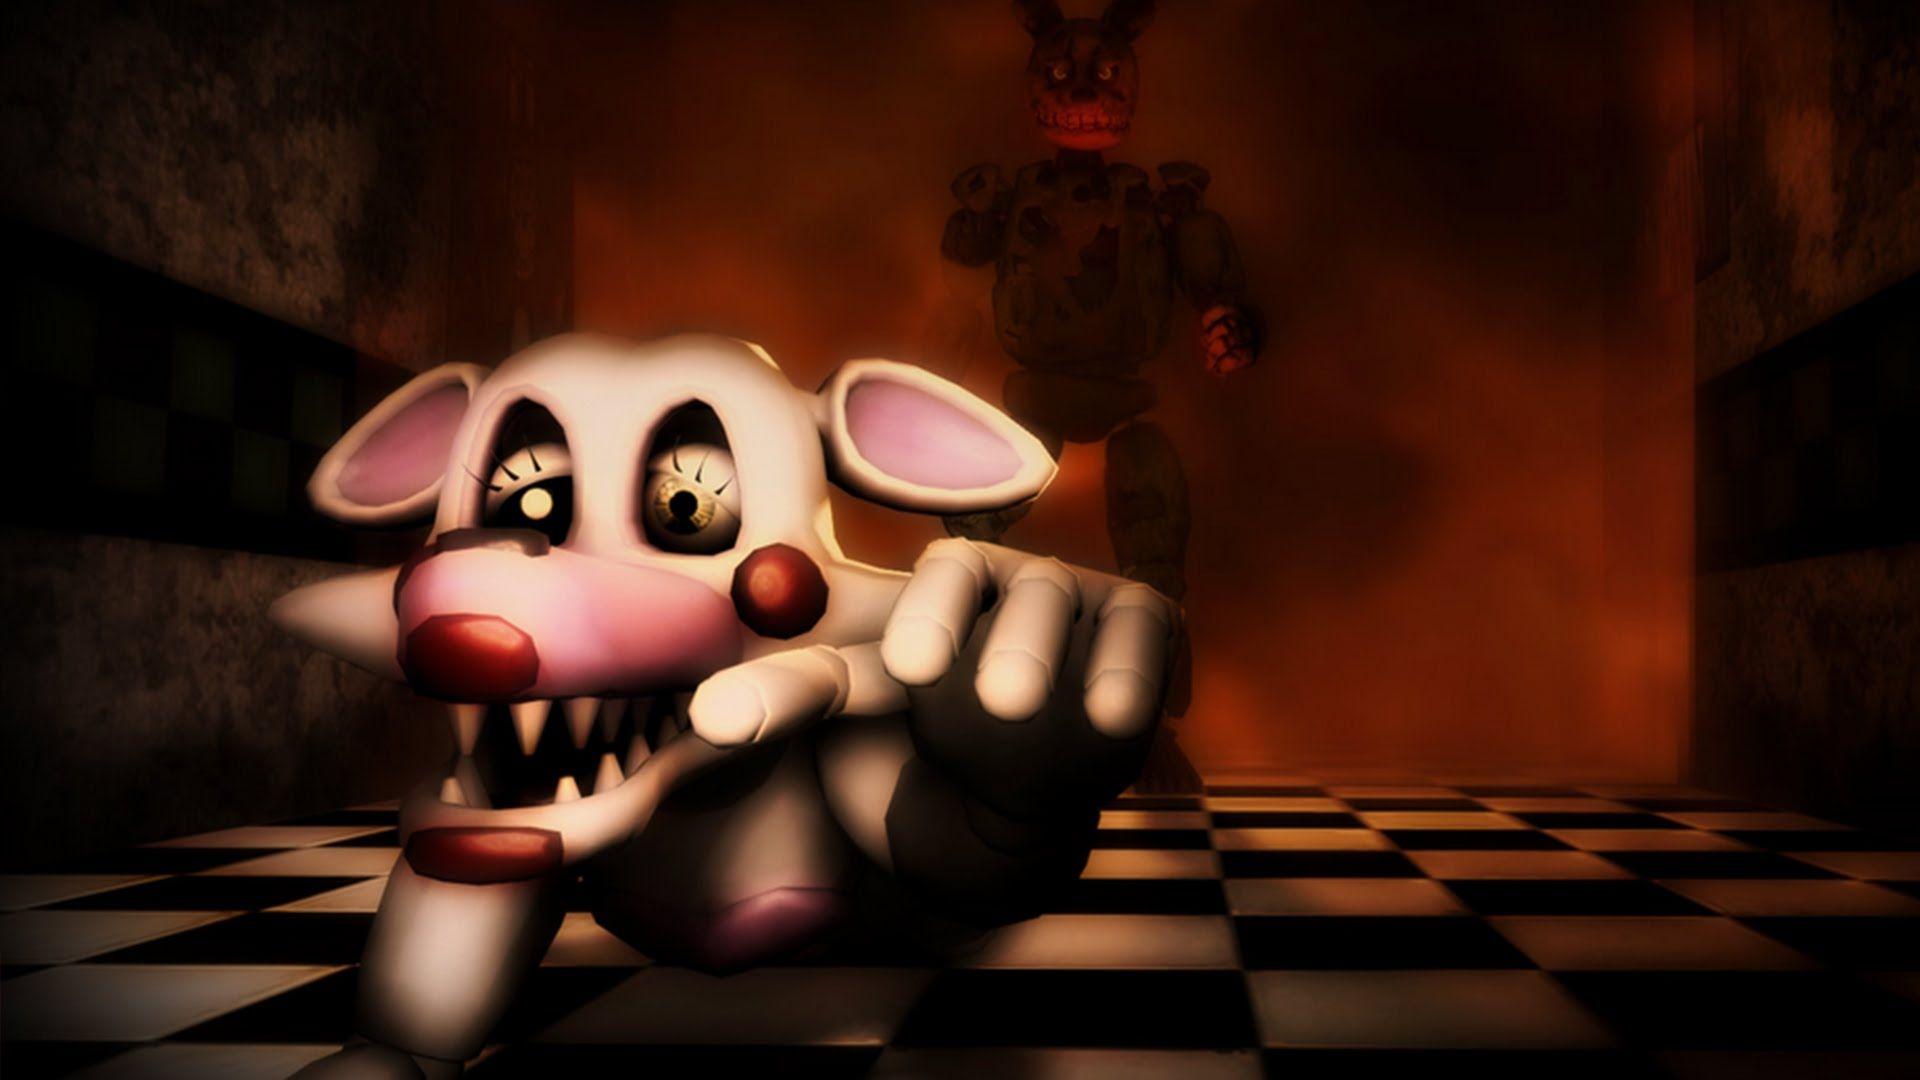 SFM FNAF Toy Chica or Mangle Five Nights at Freddy's Animation